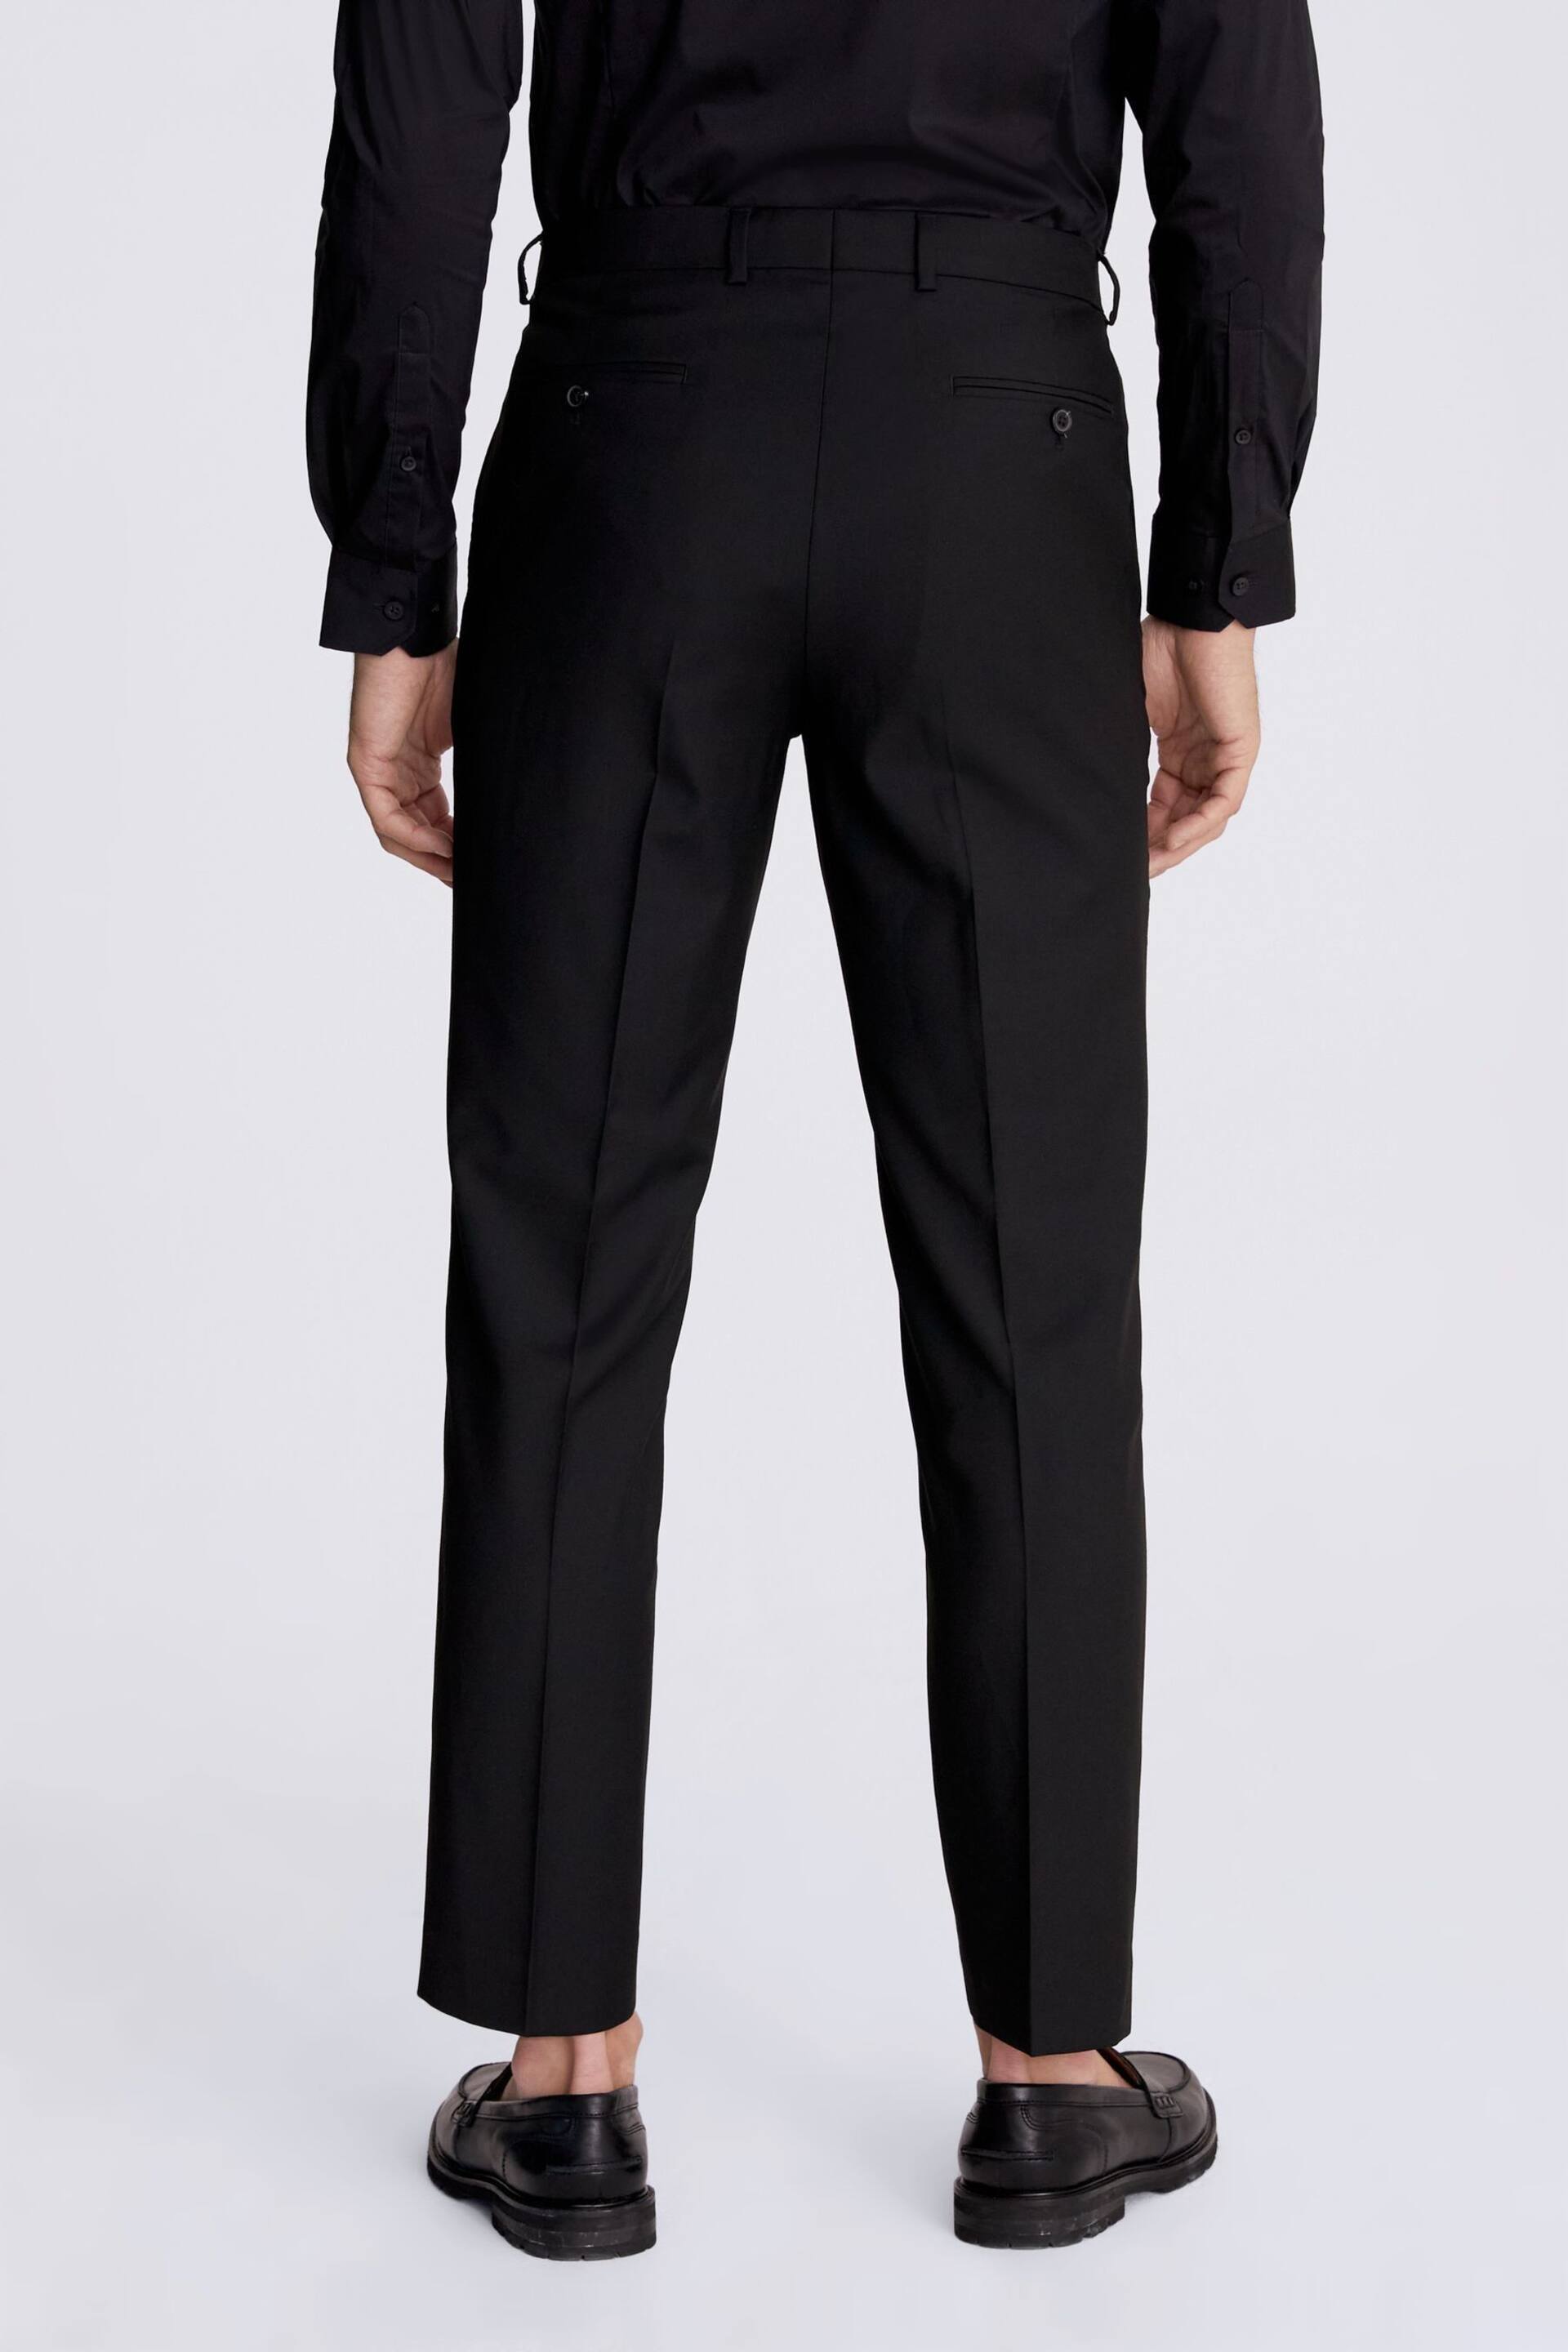 MOSS Black Suit: Trousers - Image 2 of 3